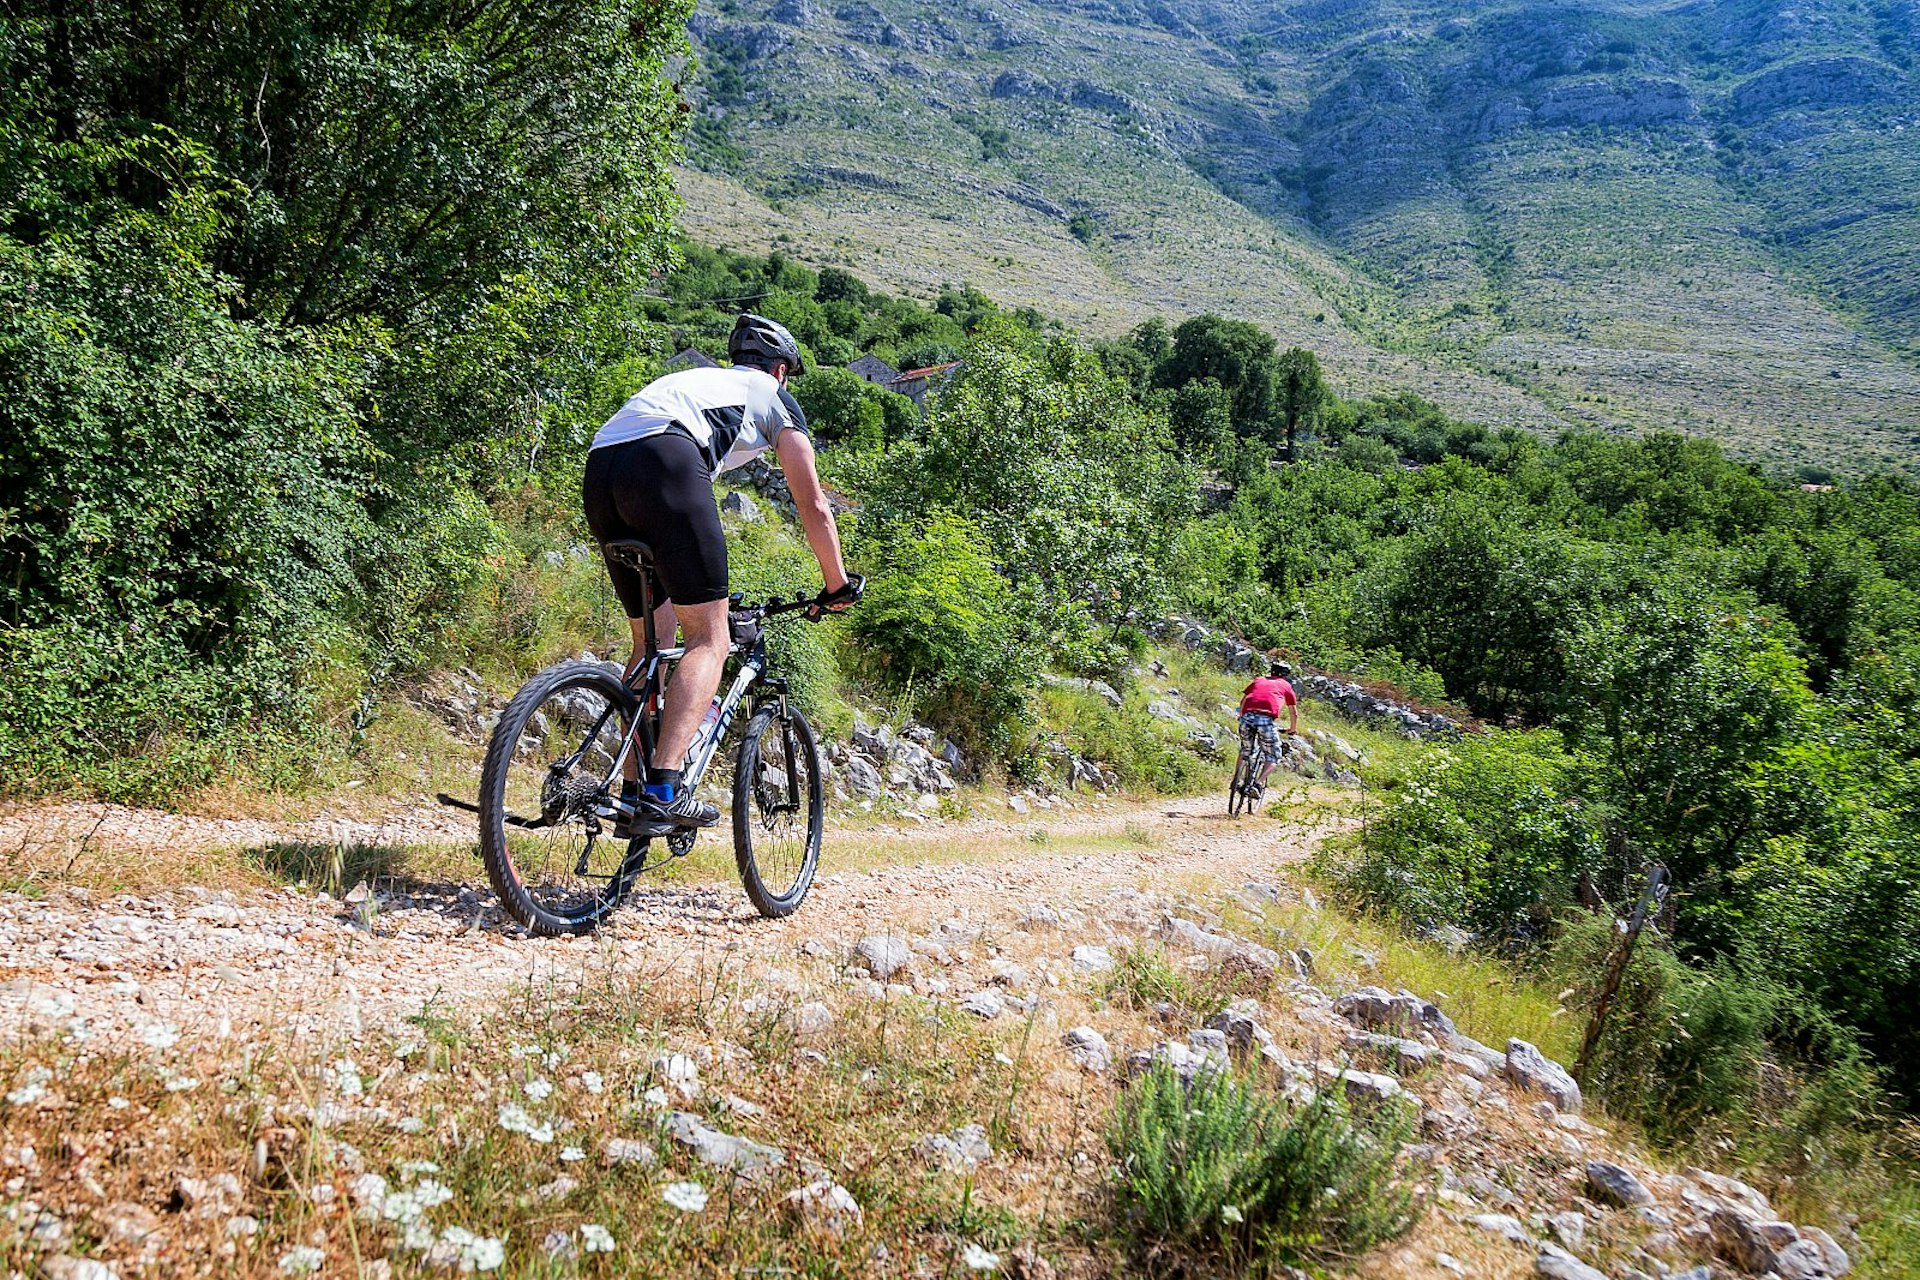 Two mountain bikers ride on a back-country road in Bosnia & Hercegovina; the track is surrounded by greenery and there is a rocky mountainside beyond.